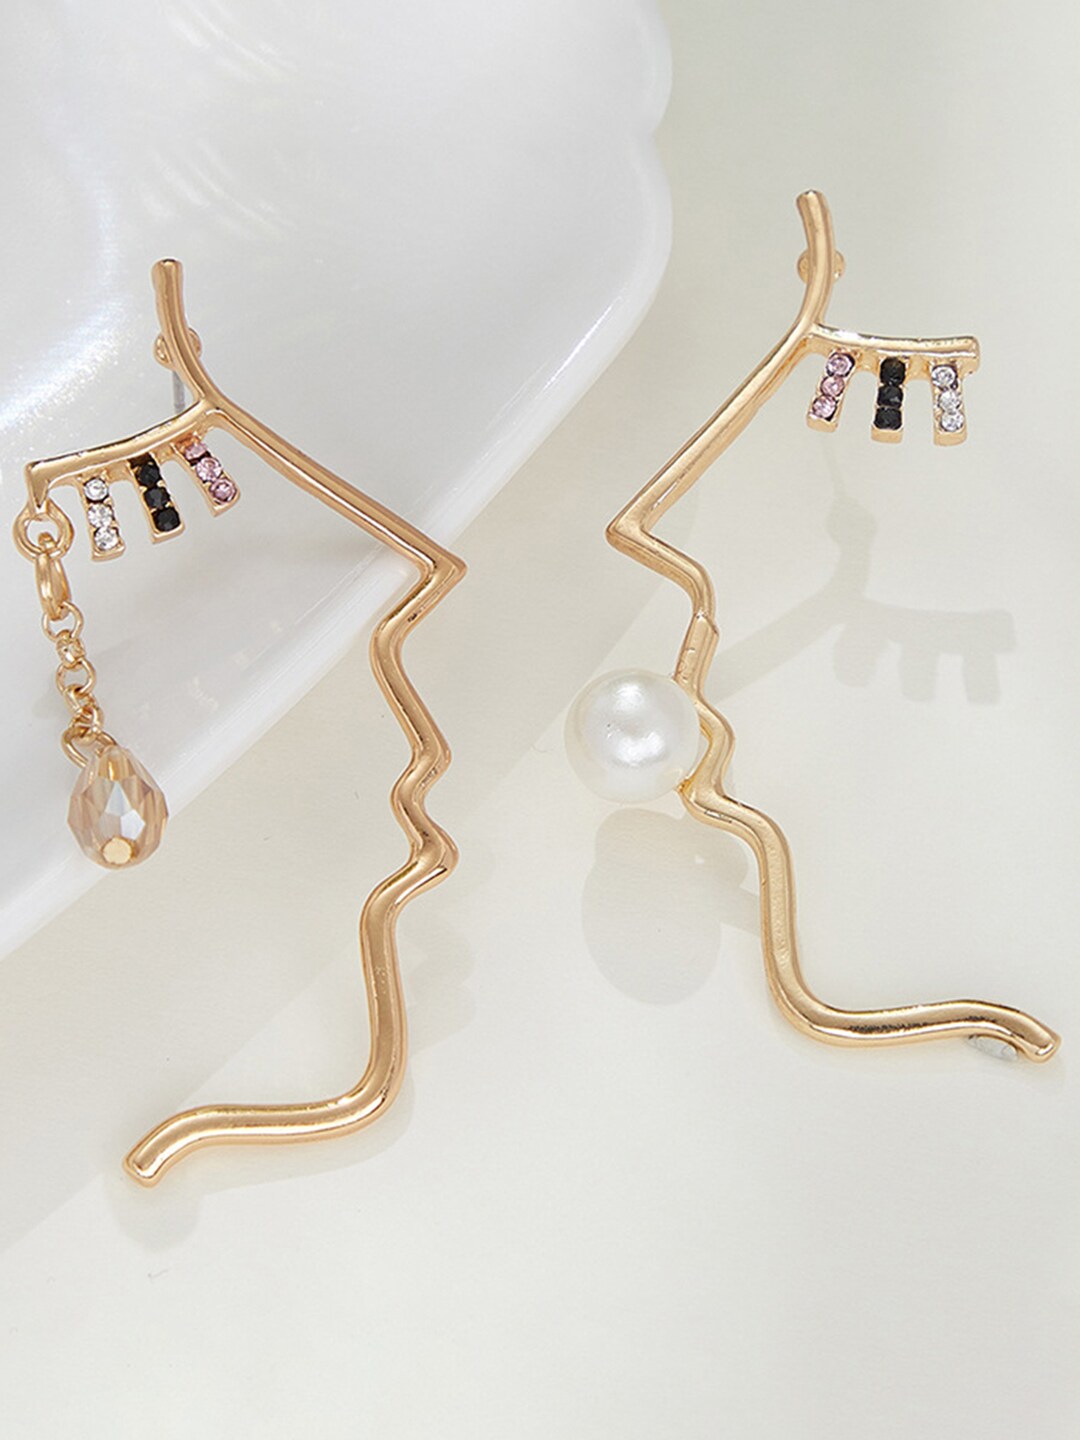 URBANIC Gold-Toned Face Shaped Stone-Studded & Beaded Mismatch Drop Earrings Price in India